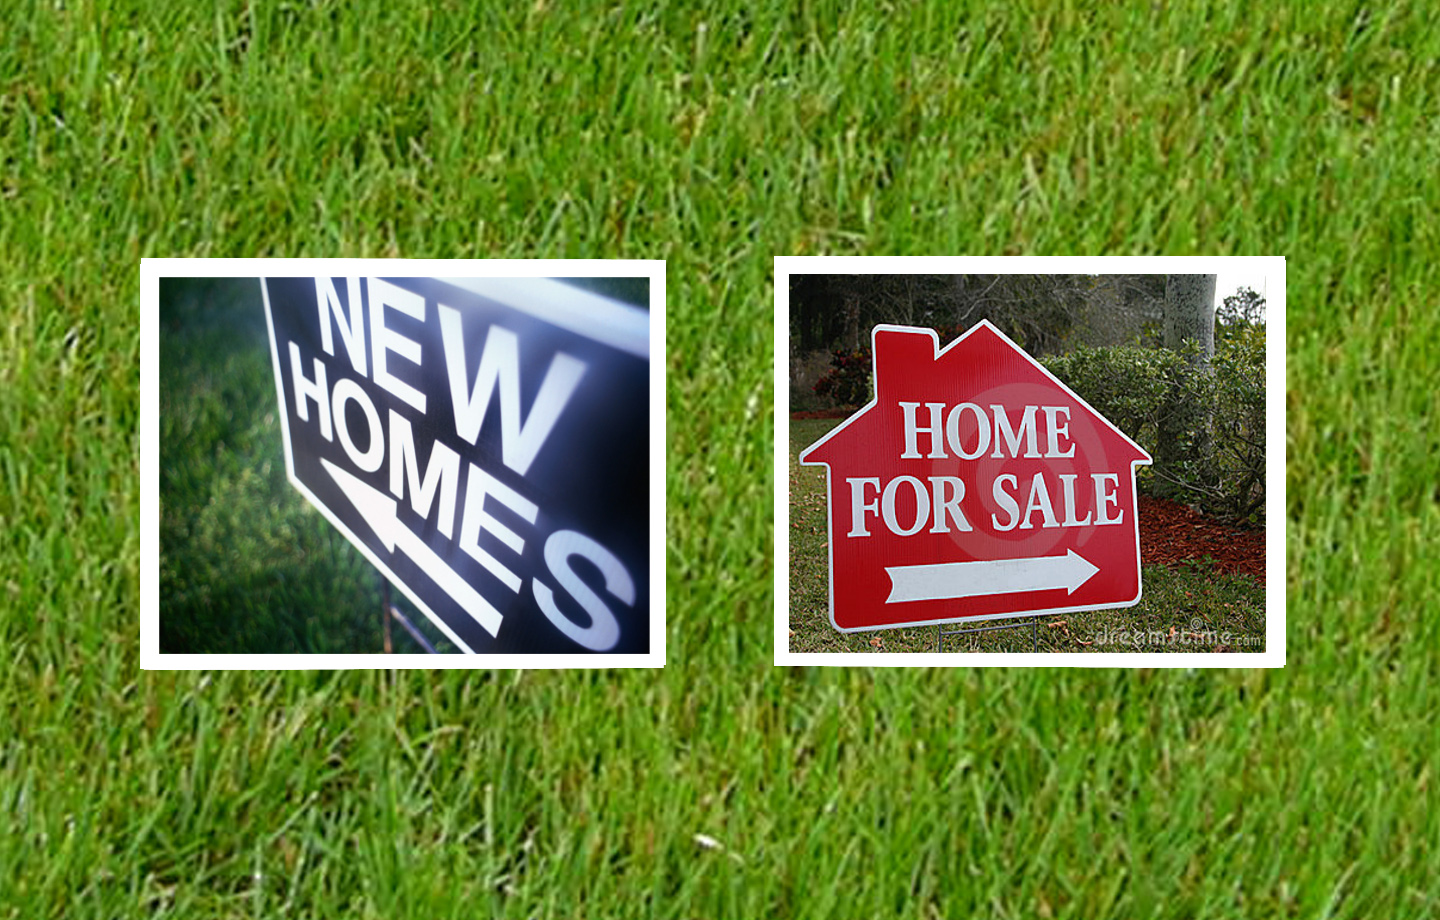 two snapshots over grass that read - NEW HOMES - and - HOME FOR SALE -